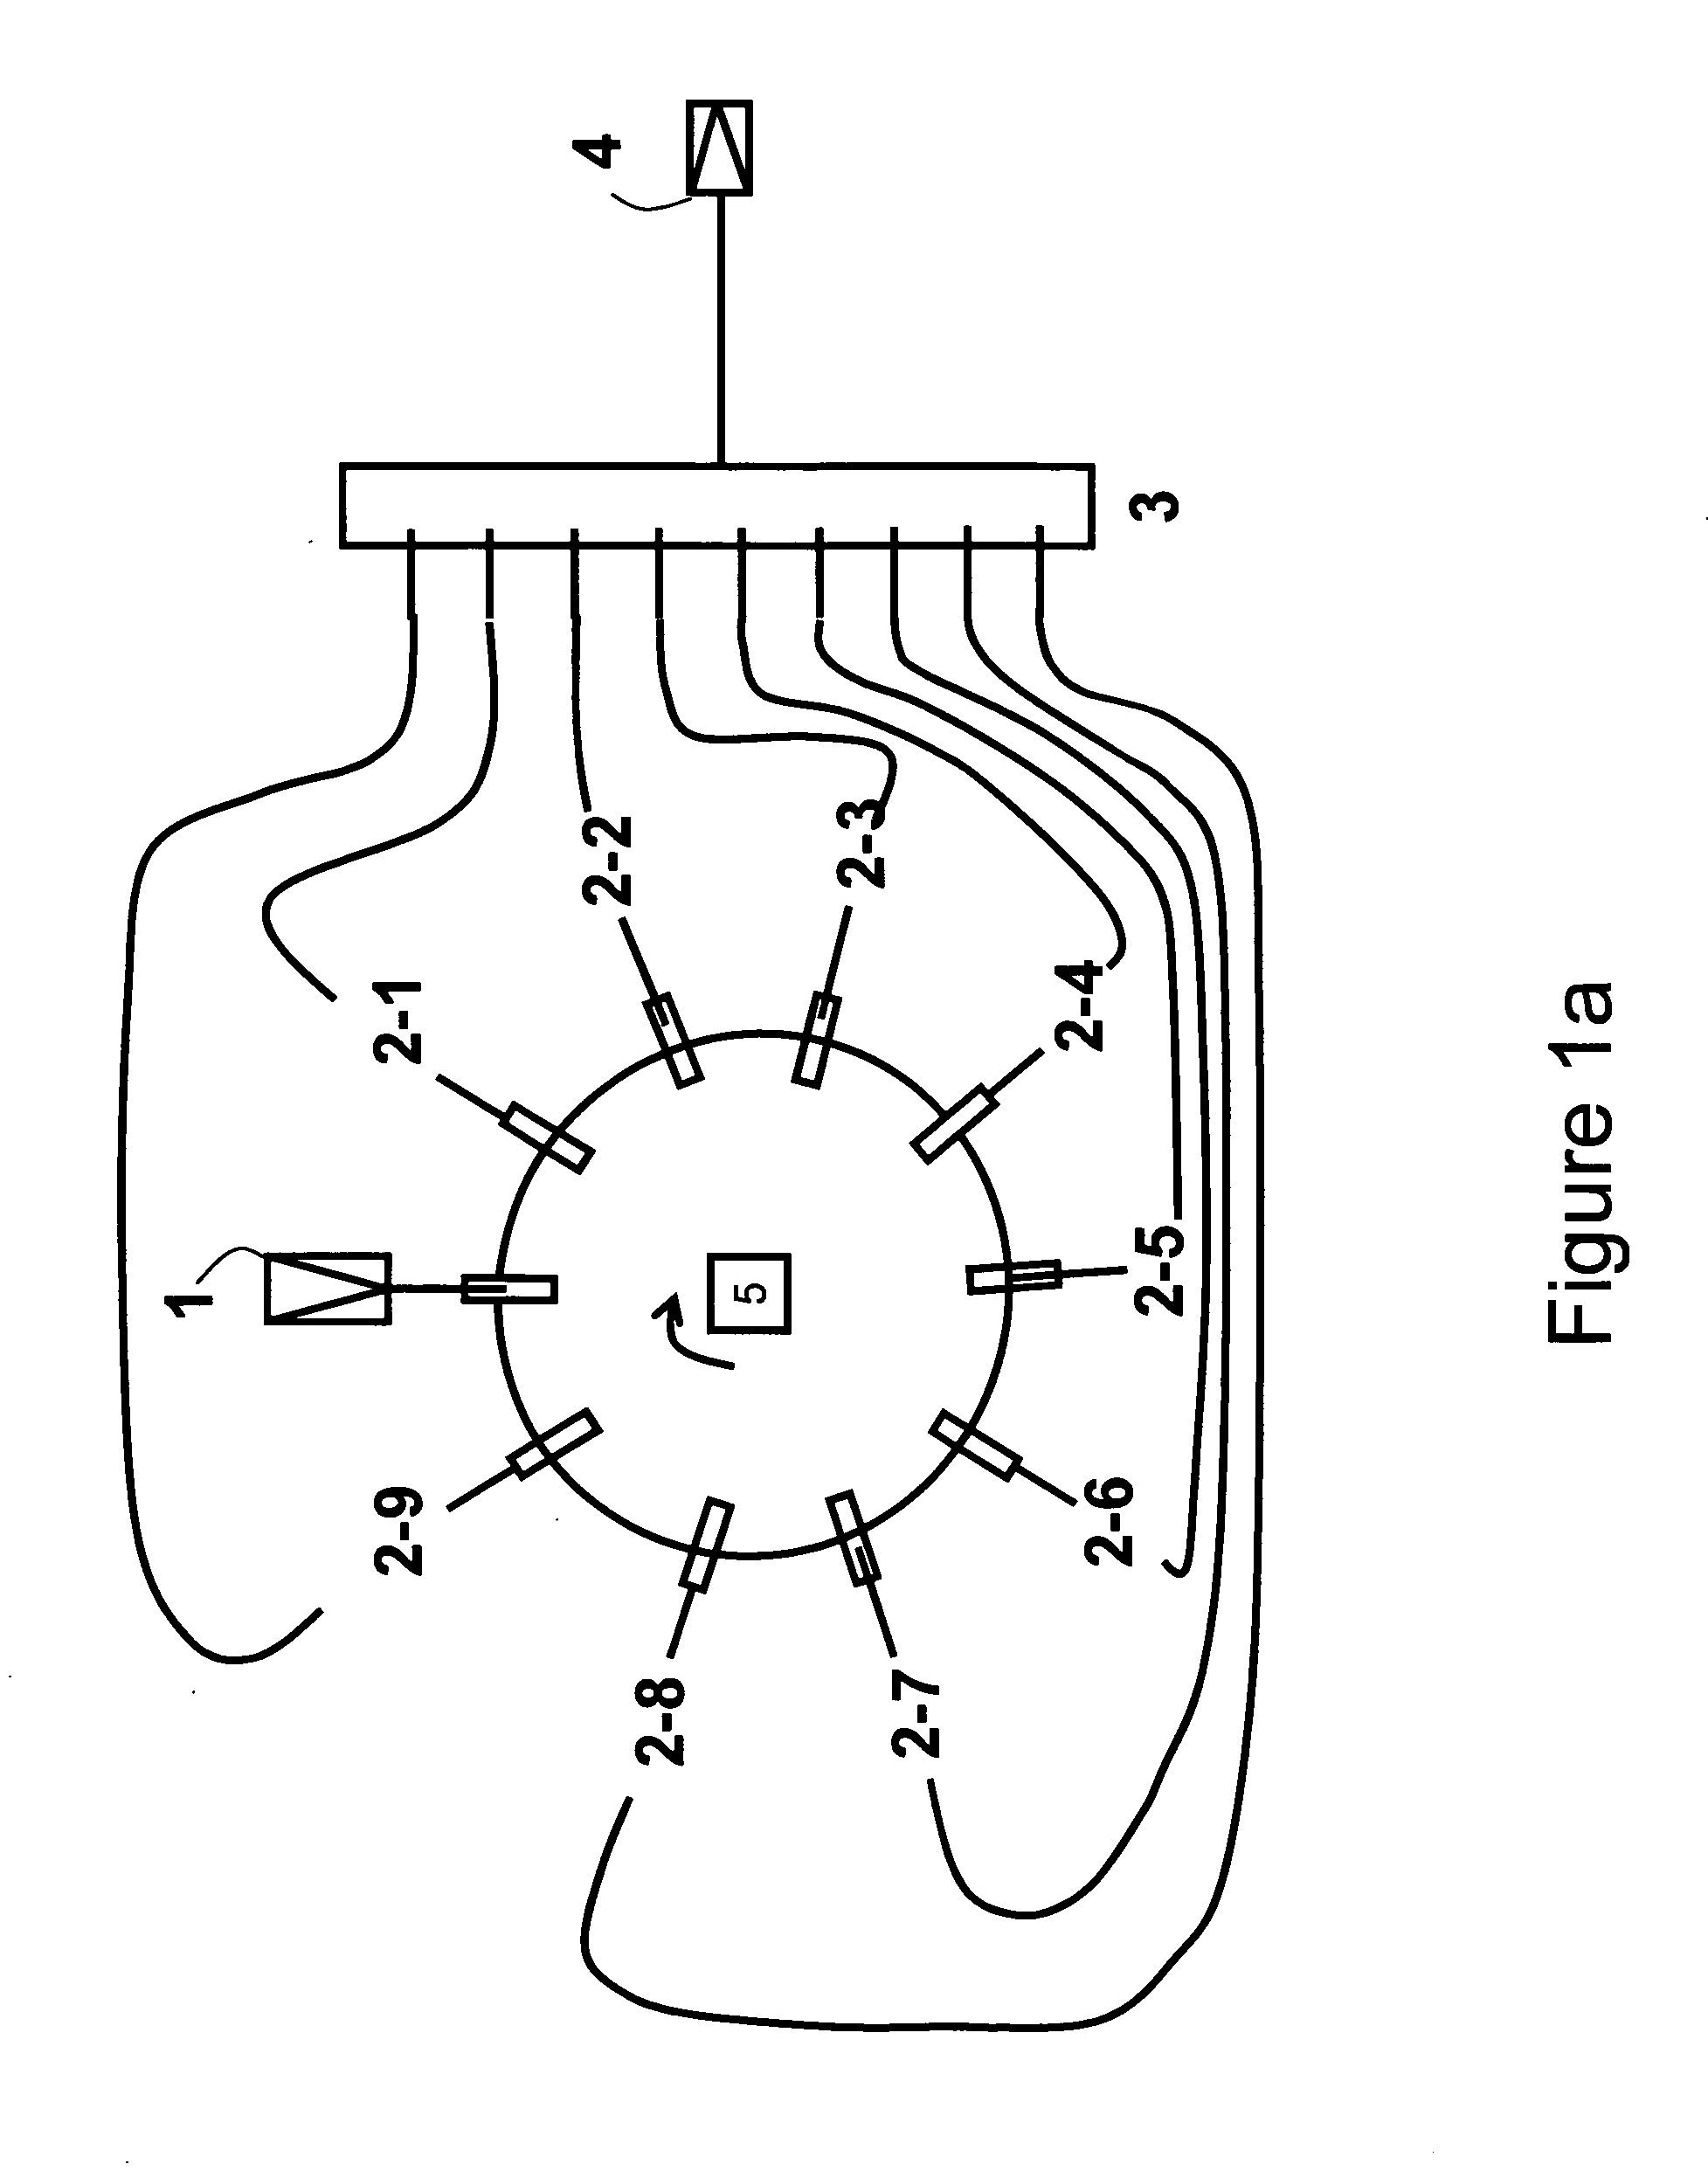 Time-Resolved Spectroscopy System and Methods for Multiple-Species Analysis in Fluorescence and Cavity-Ringdown Applications